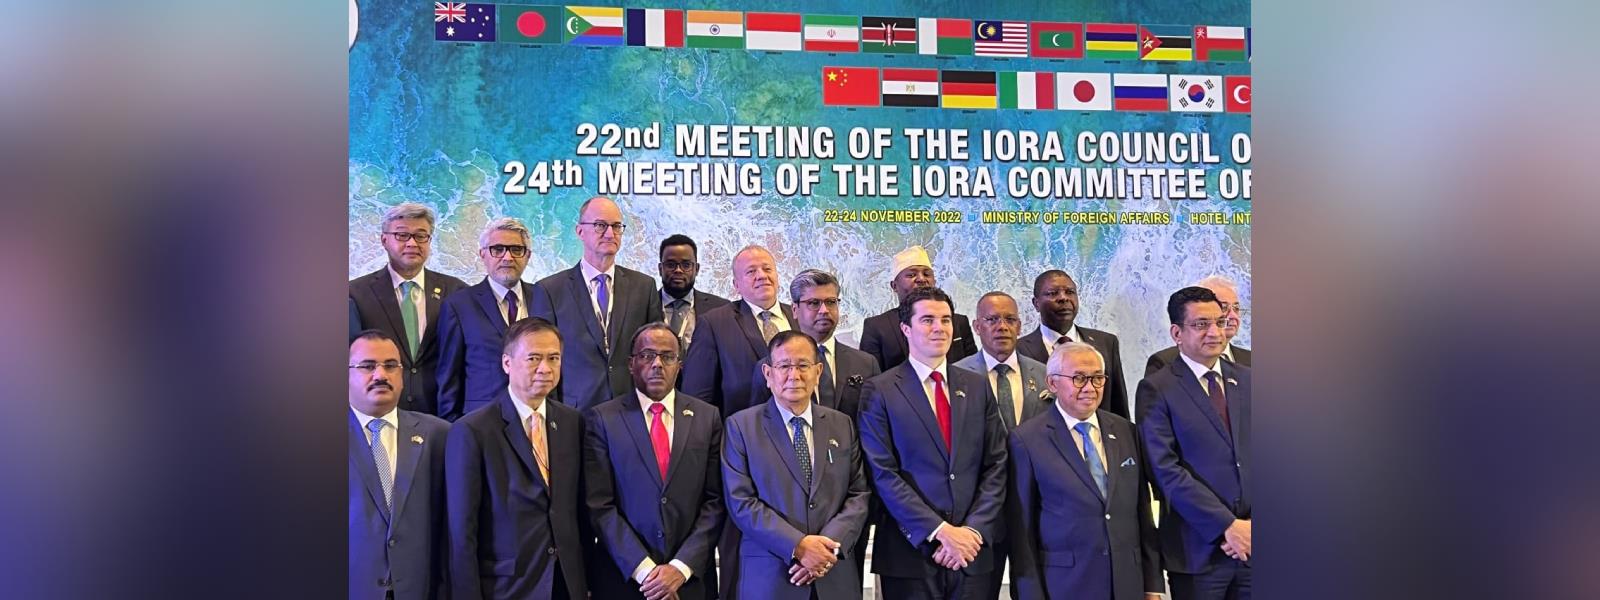 Minister of State for External Affairs,  Dr. Rajkumar Ranjan Singh participated in the 22nd Meeting of the IORA Council of Ministers in Dhaka.